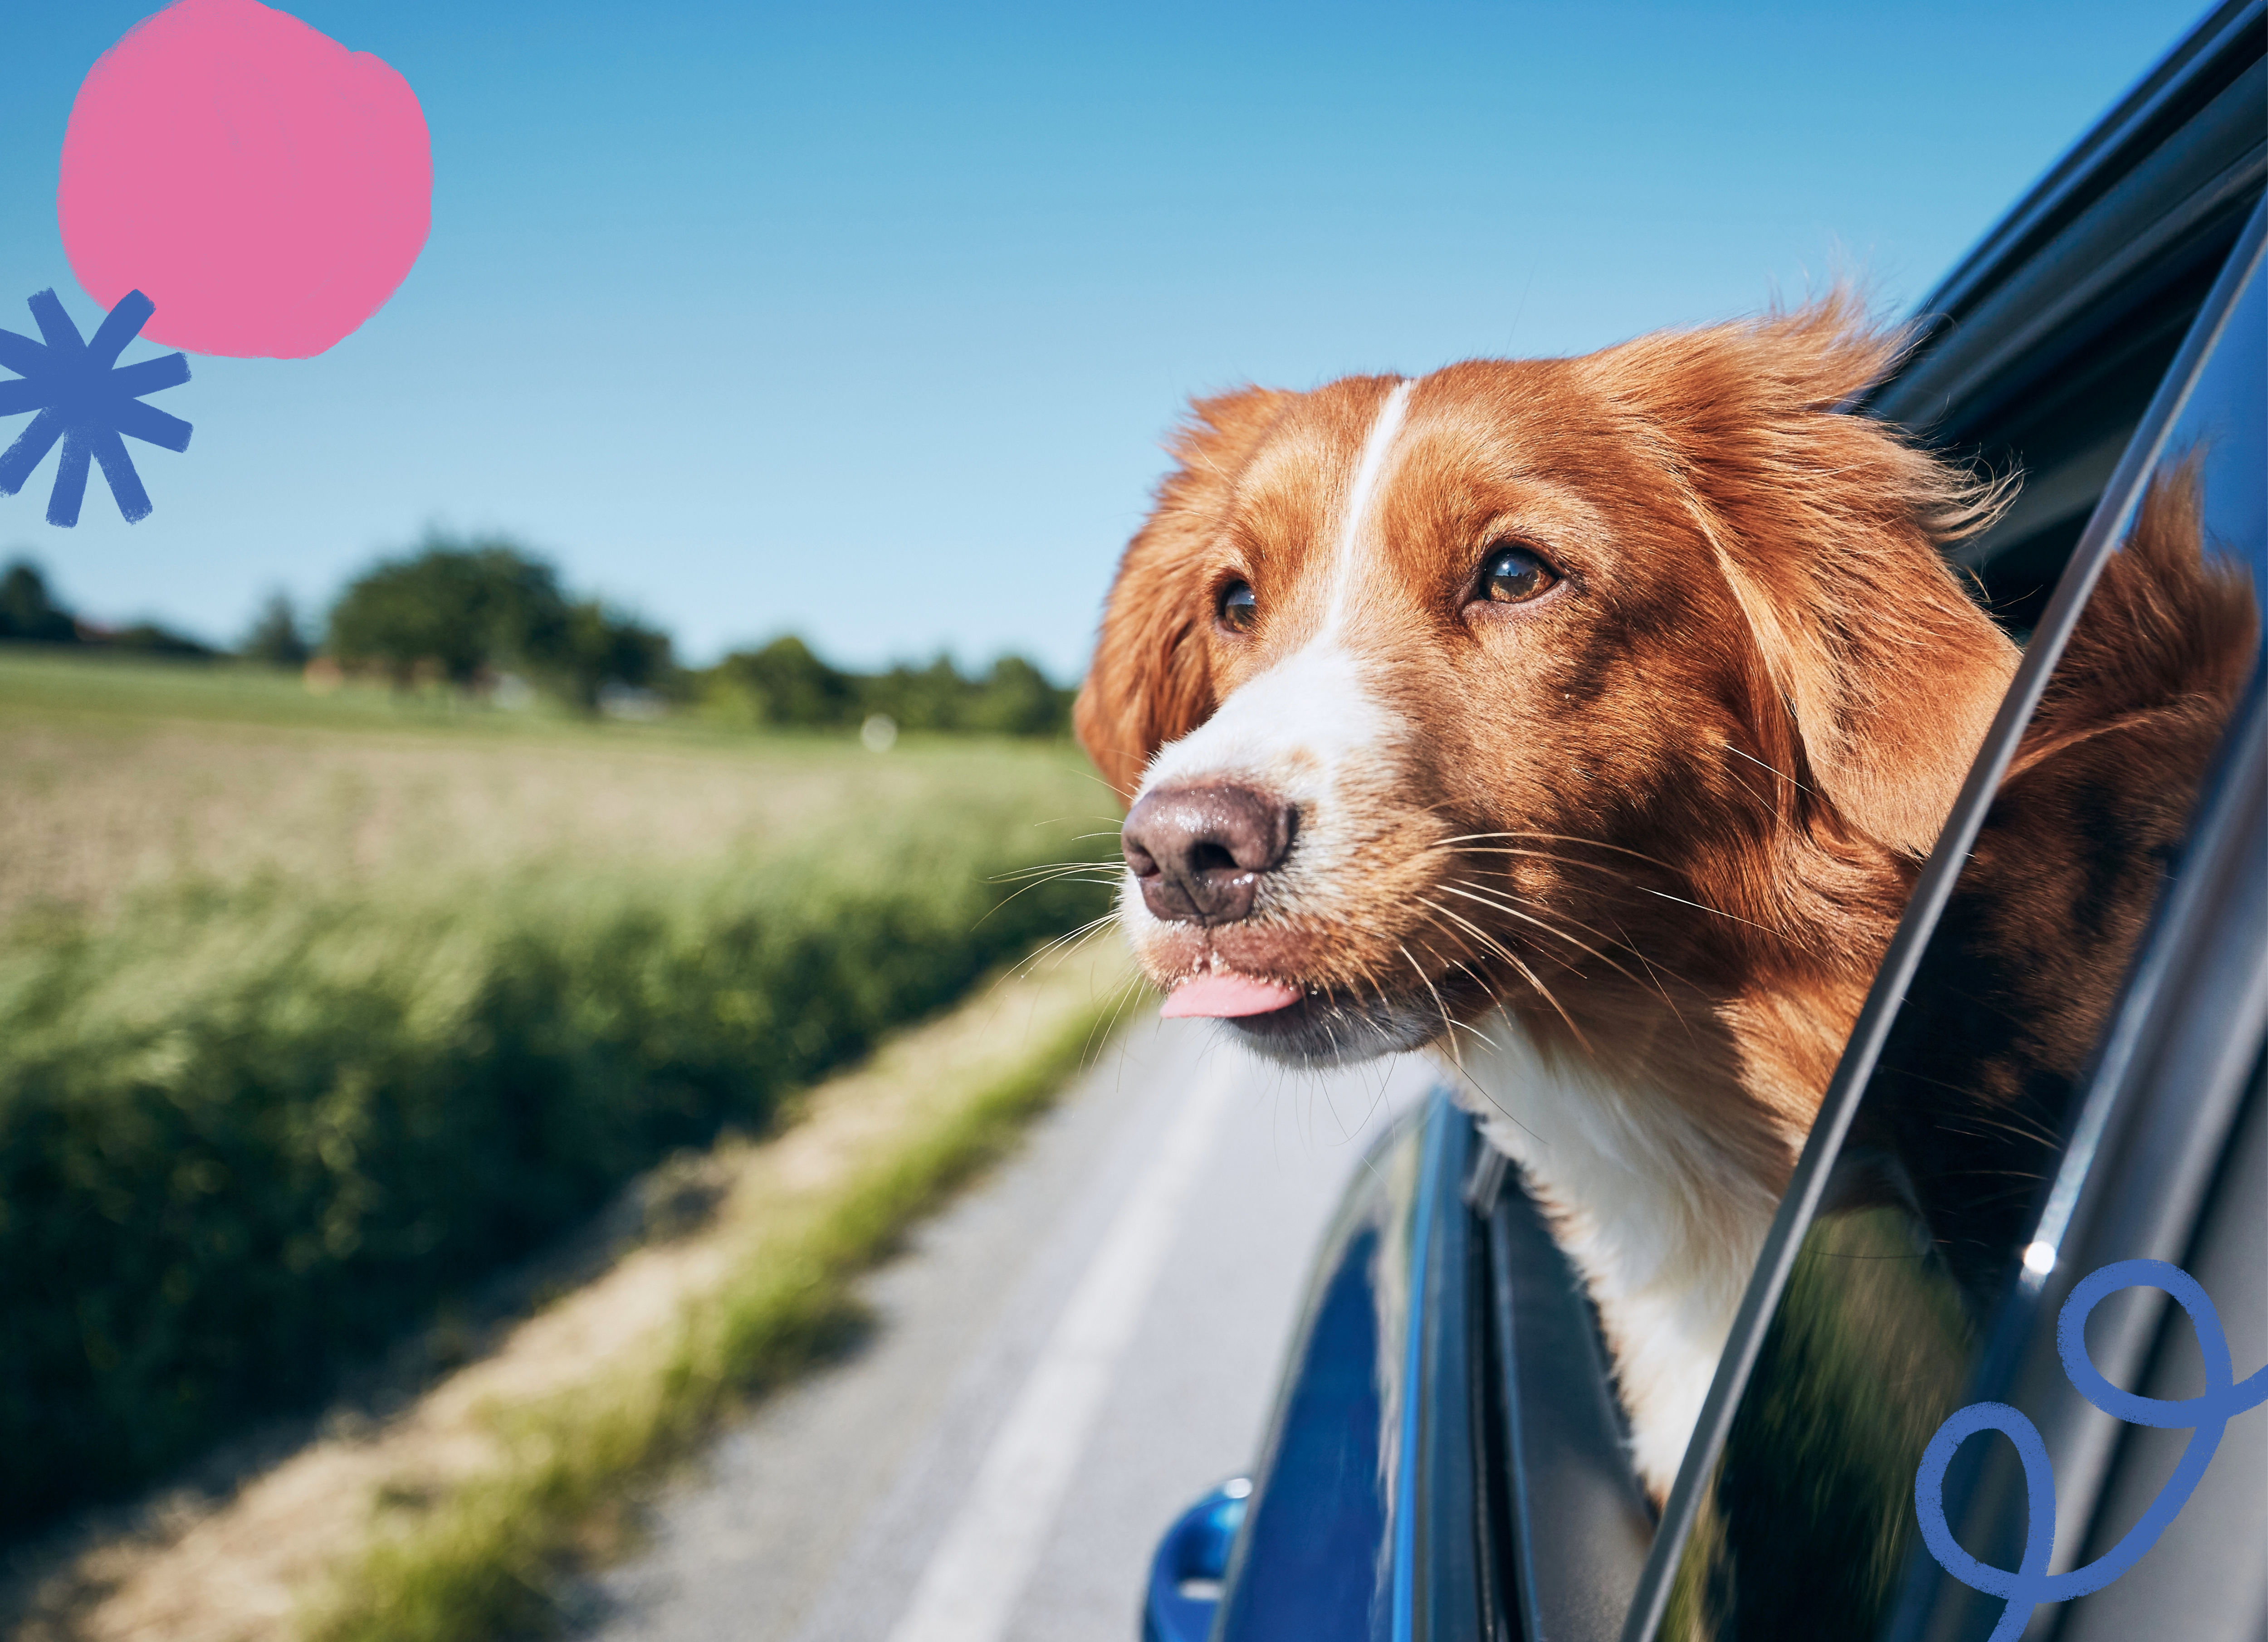 duck tolling retriever dog riding in a car with its head sticking out of the window with his tongue sticking out